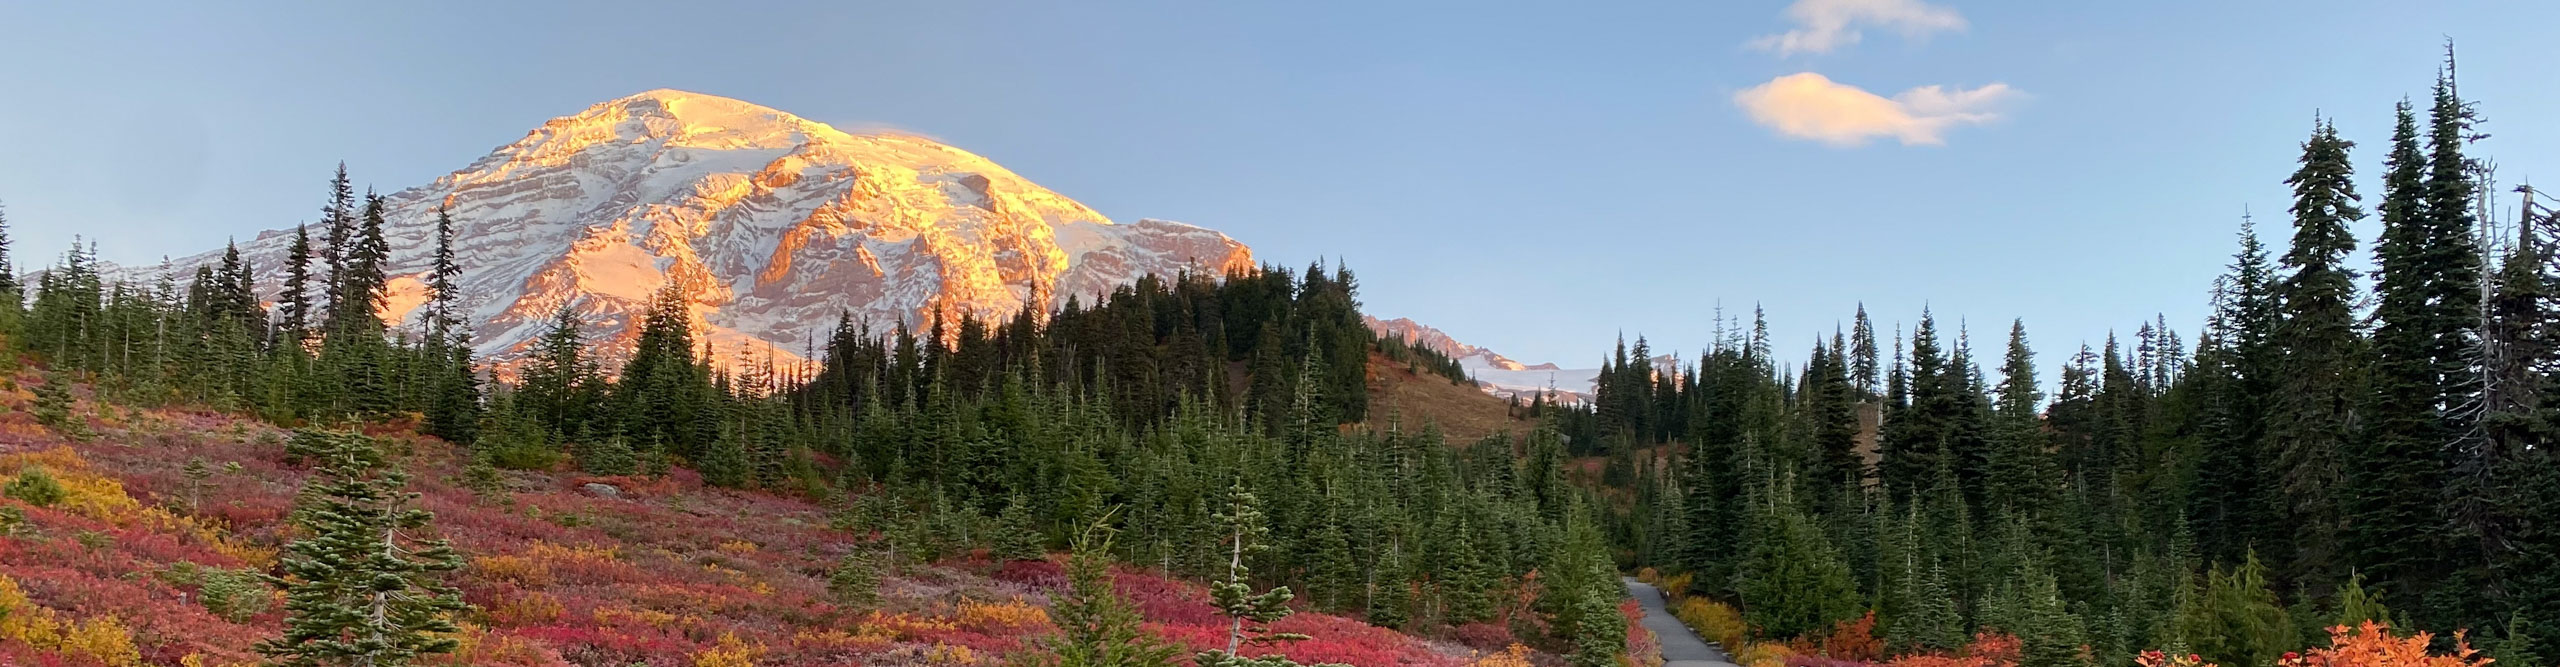 hikers at mount rainier with fall colors at sunset 